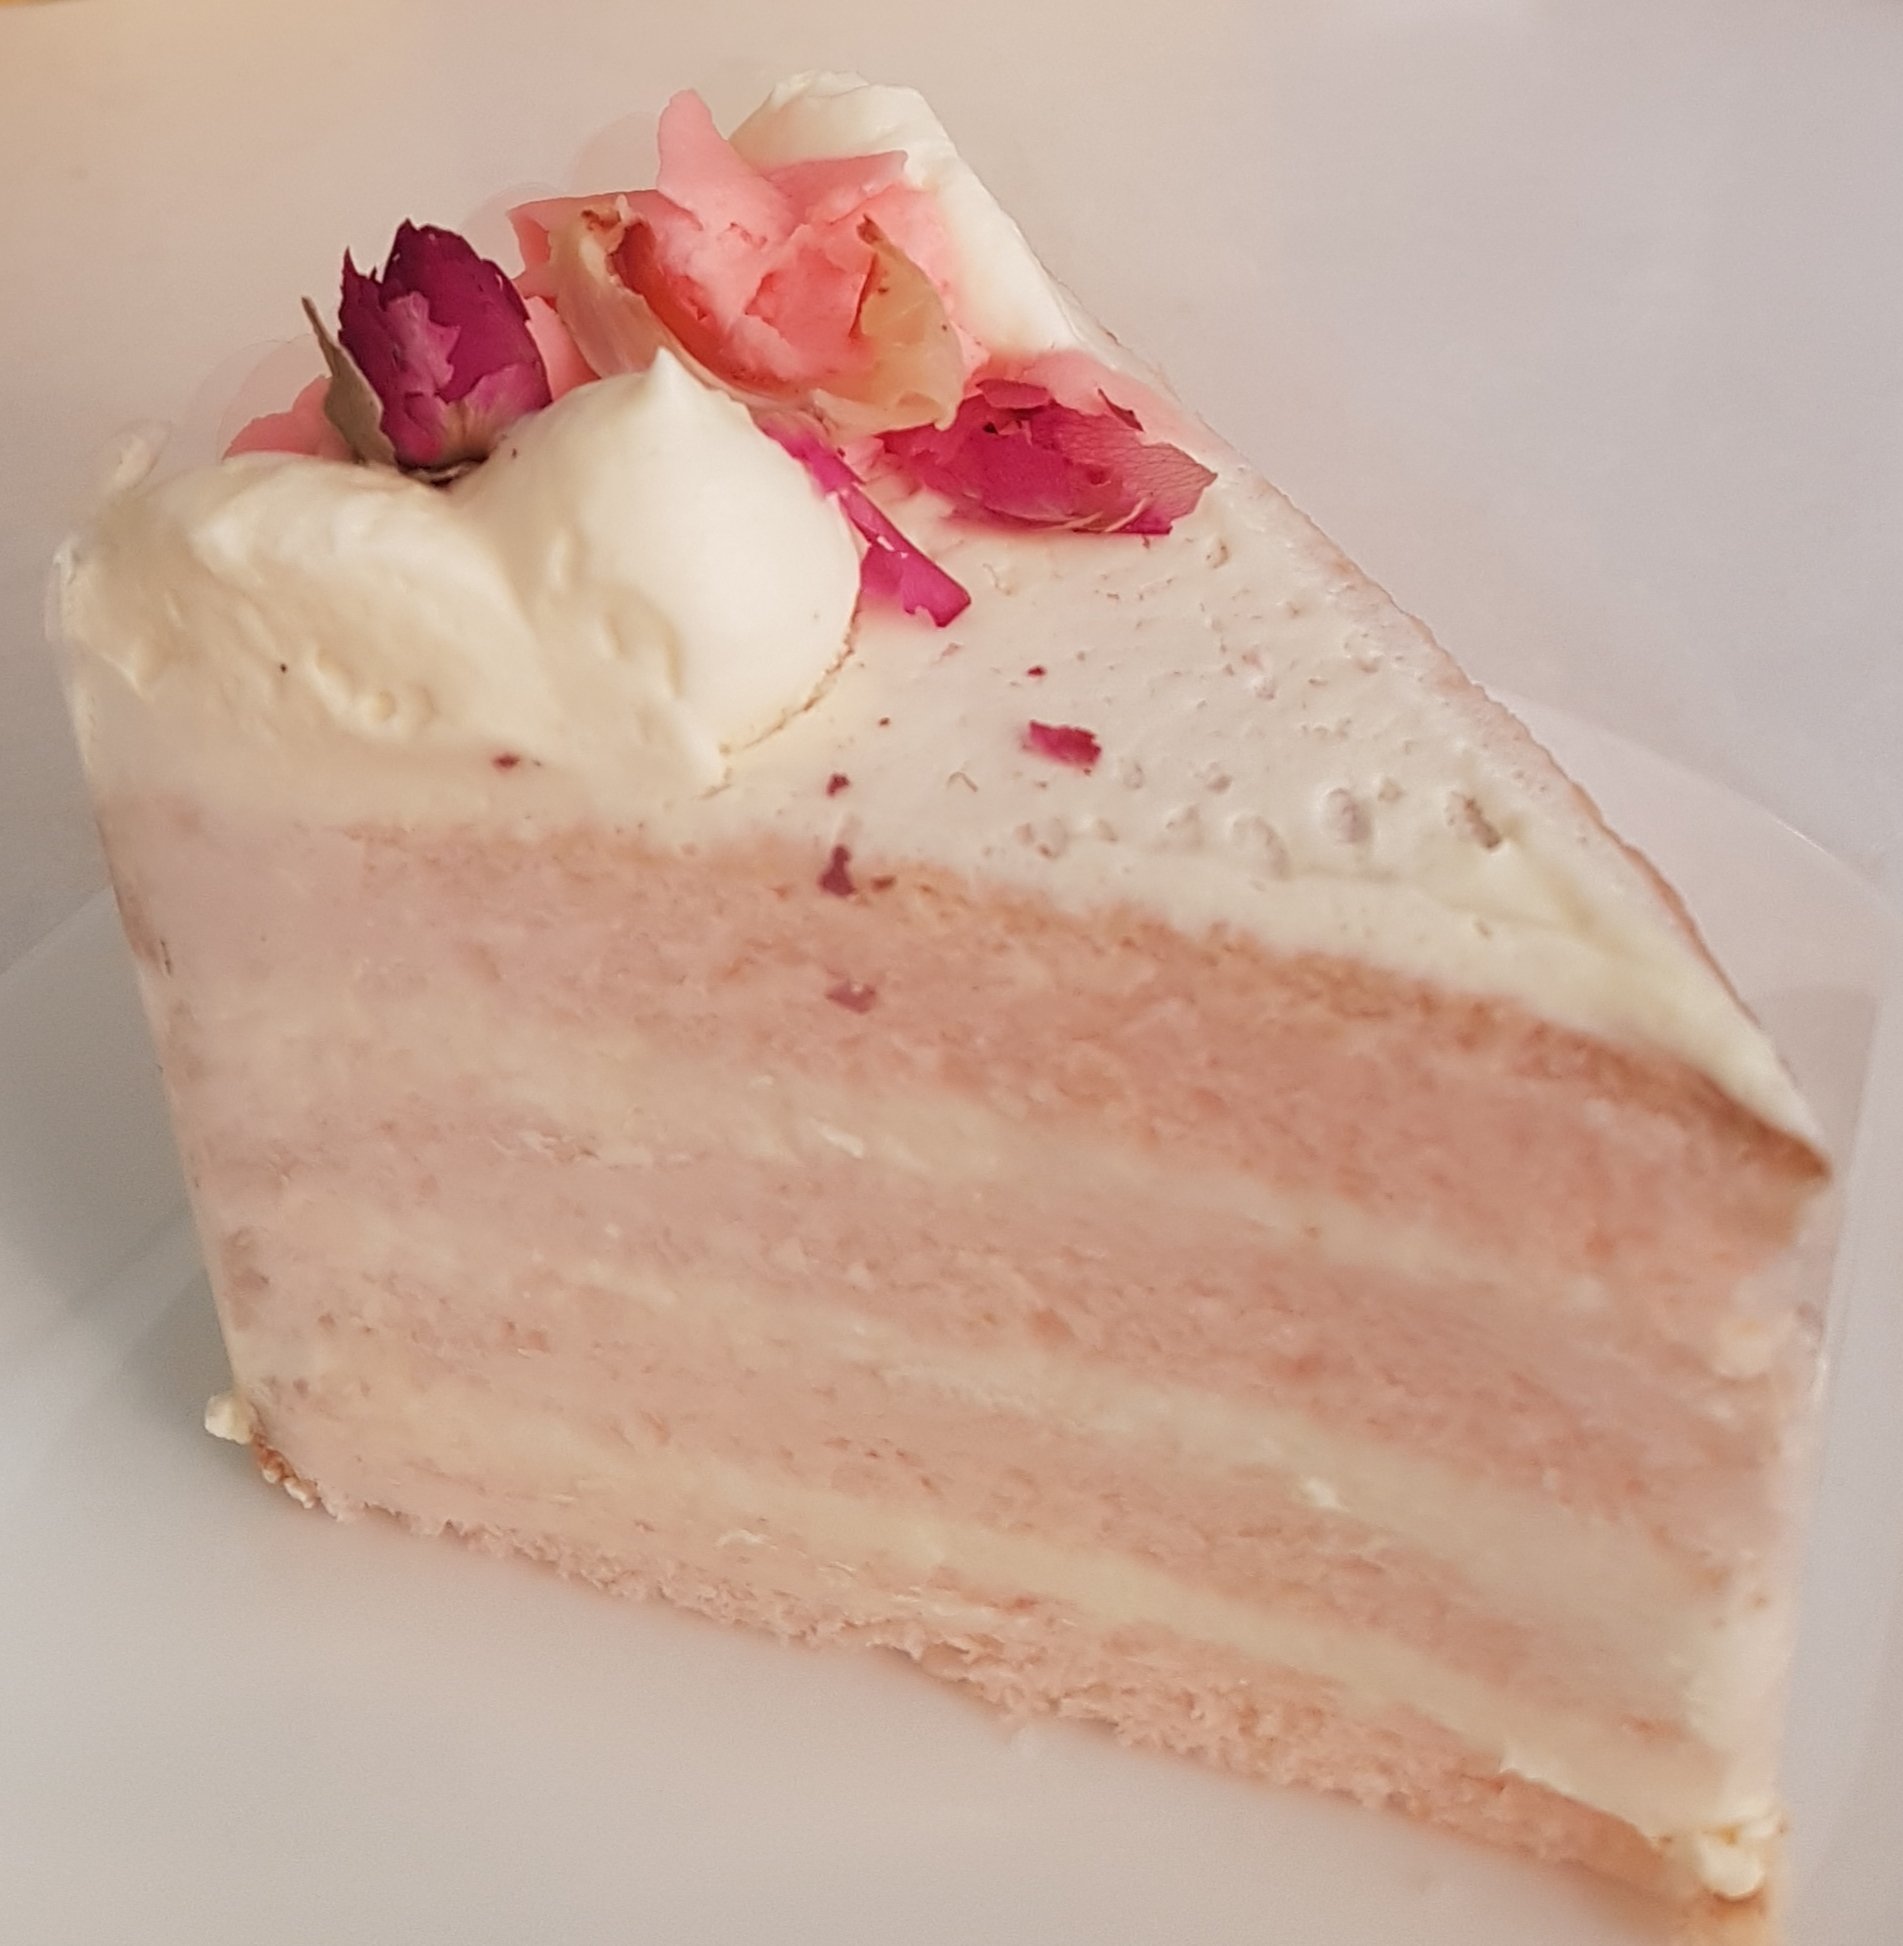 Loving Creations for You Lychee Raspberry Strawberry Rose Chiffon Cake  with Diplomat Cream and Lychee Jelly